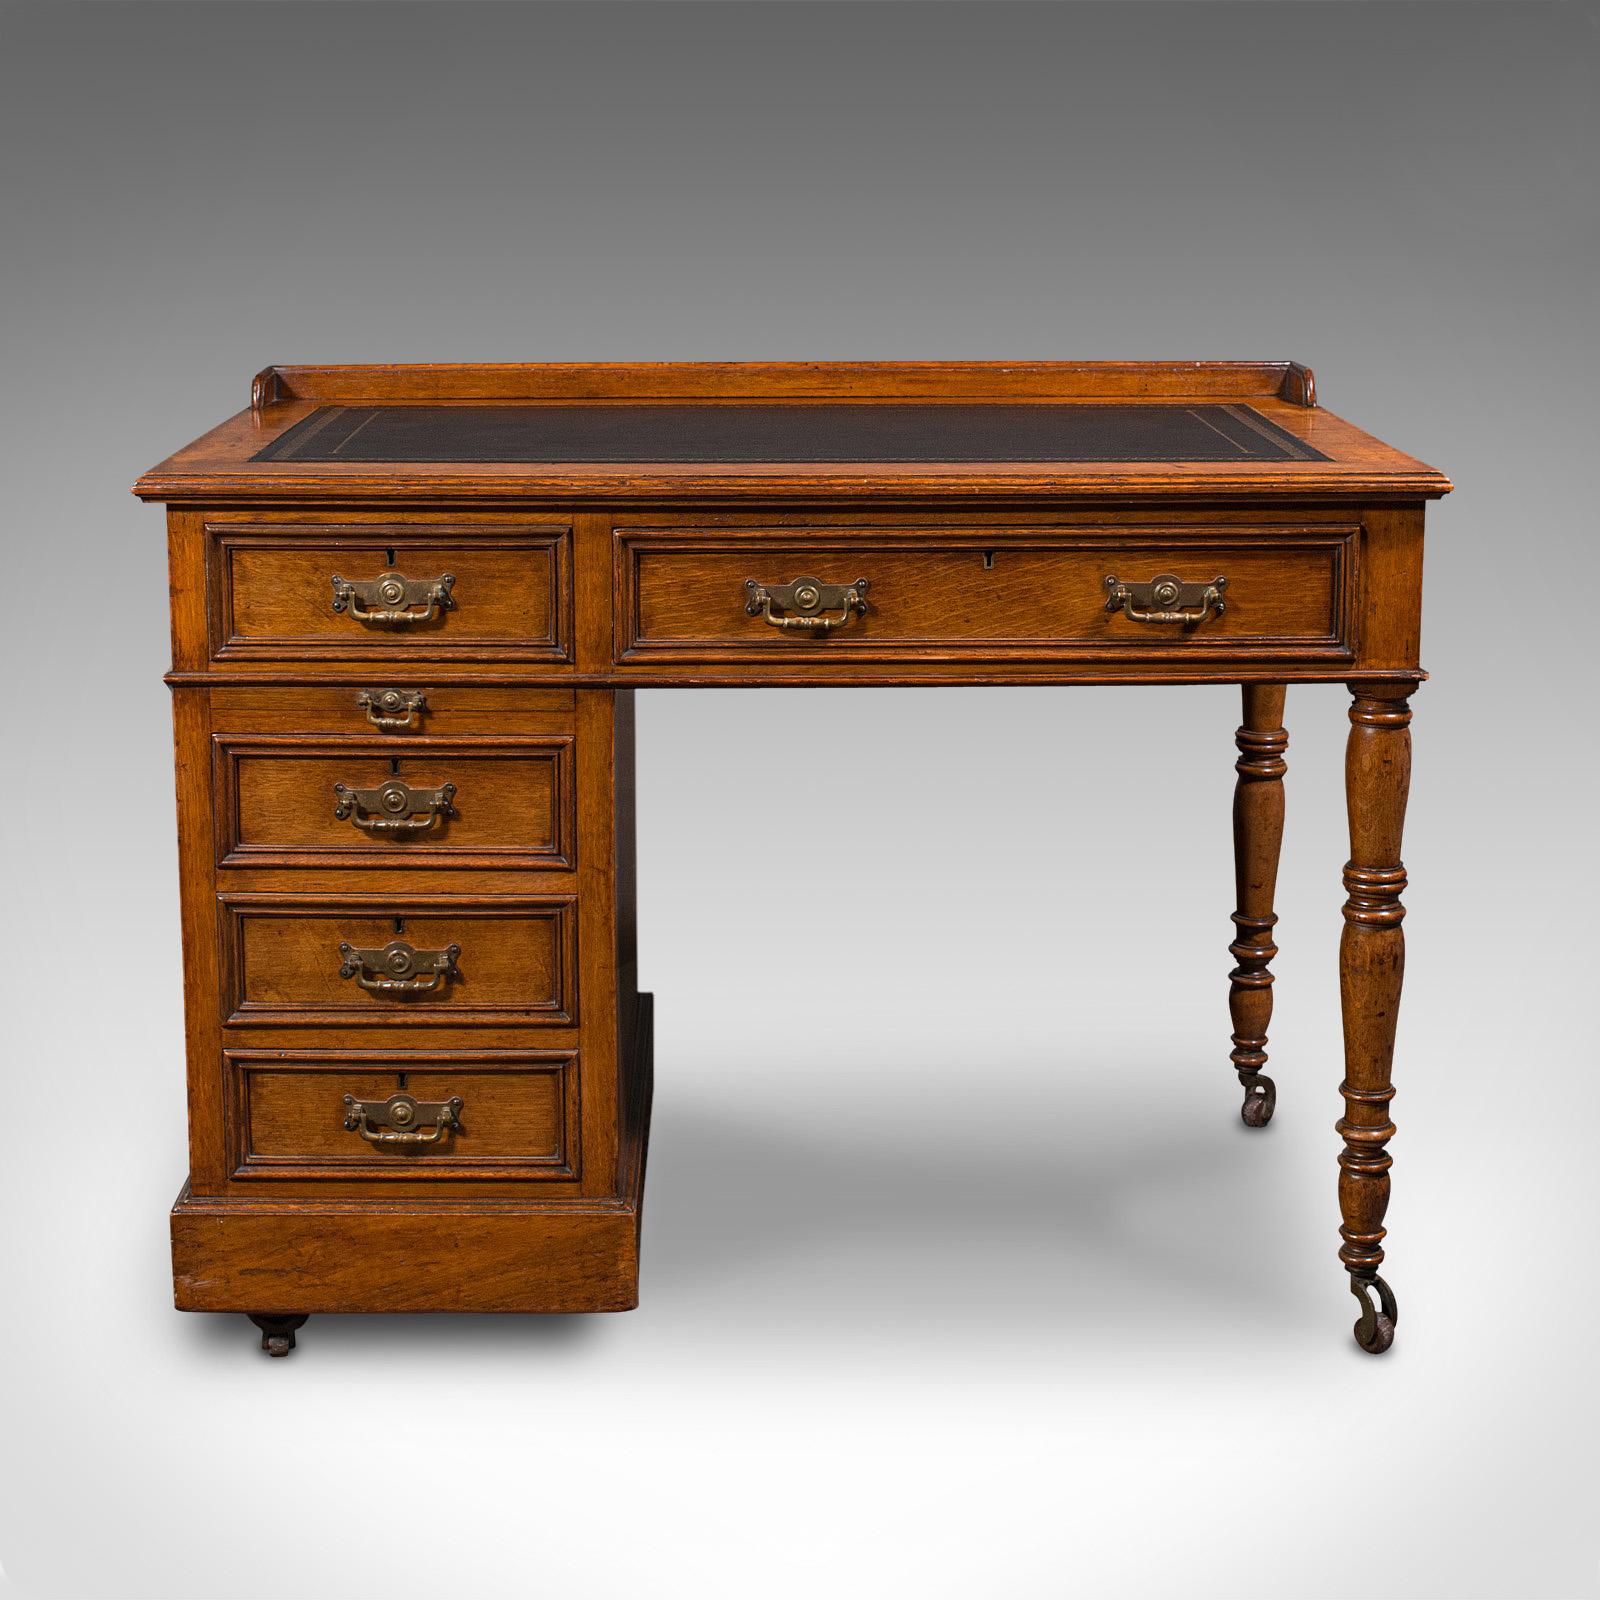 This is an antique pedestal desk. An English, oak and leather writing table, dating to the late Victorian period, circa 1880.

An attractive single pedestal desk offering fine colour and craftsmanship
Displays a desirable aged patina and in good